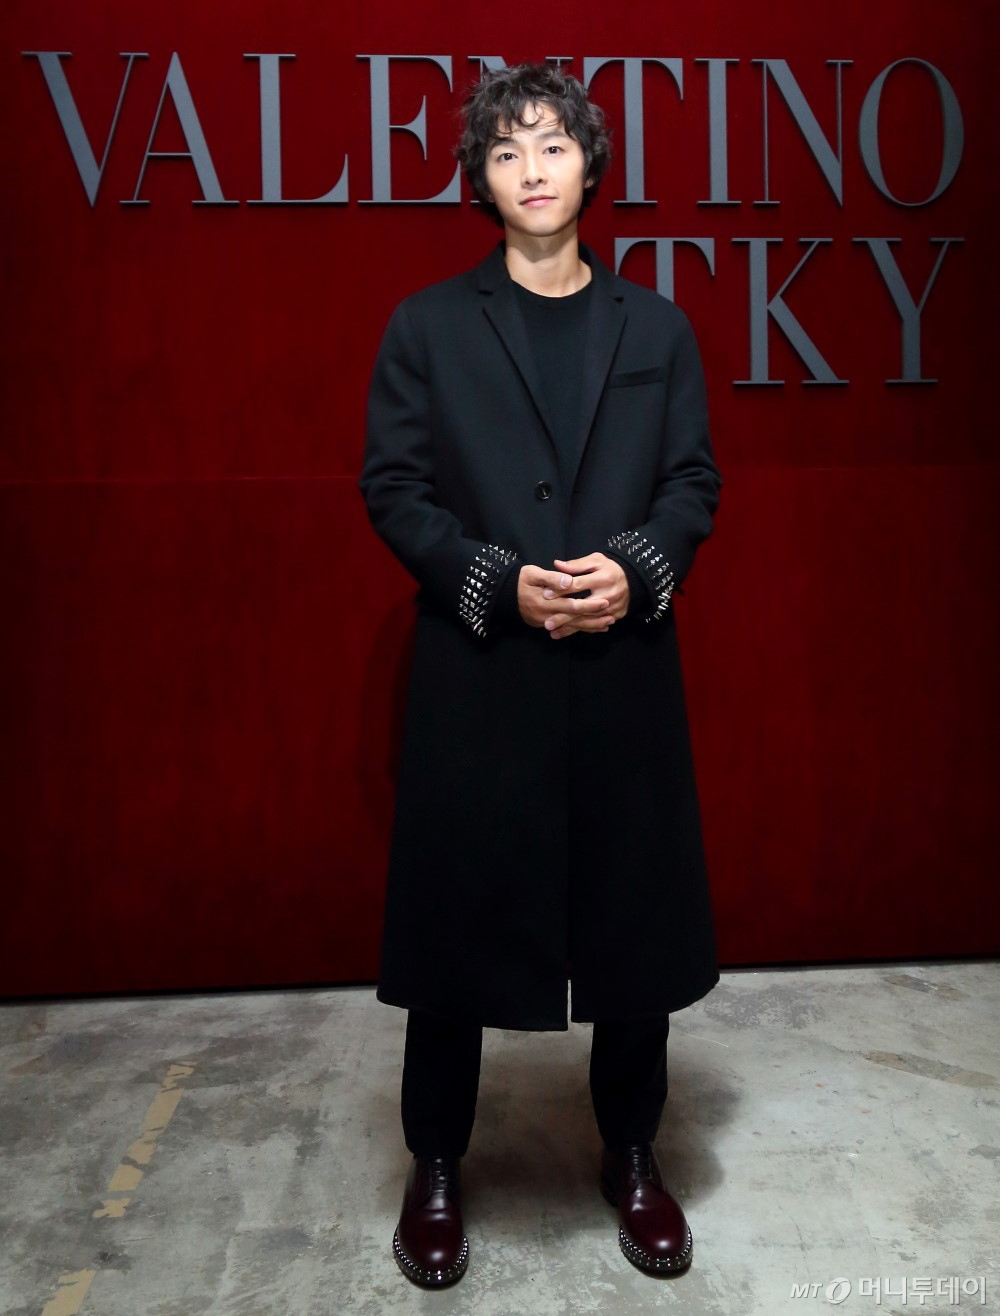 <p>Actor Song Joong-ki in public.</p><p>Song Joong-ki for the past 27 Tokyo, Japan Open in Valentino SpA Preta Forte 2019 pre collection in Korea as a representative attended.</p><p>This day, Song Joong-ki is a dark toned coat and knitwear, pants wearing a funky style look. He wears a coat sleeve along the end studs decor no intense feeling.</p><p>Especially Song Joong-ki is pump hairstyle to change your fans  attention.</p><p>Valentino SpA according to the Fashion show after Song Joong-ki is the Valentino SpAs creative Director, Piel Spa, come skin 춀 to backstage meet in celebration and praise.</p><p>Meanwhile, Song Joong-ki for the past 10 31 Seoul Shilla Hotel from the actress Song Hye-kyo and the wedding of the century raised. Song Joong-ki is the half of next year to broadcast for tvN drama not forward Chronicles(working title)appeared to be. Song Hye-kyo is the last 28 days the first broadcast drama BoyfriendTheater in return.</p><p>Valentino SpA, Preta Forte 2019 Pre Collection Show, actor Song Joong-ki official invitation</p>